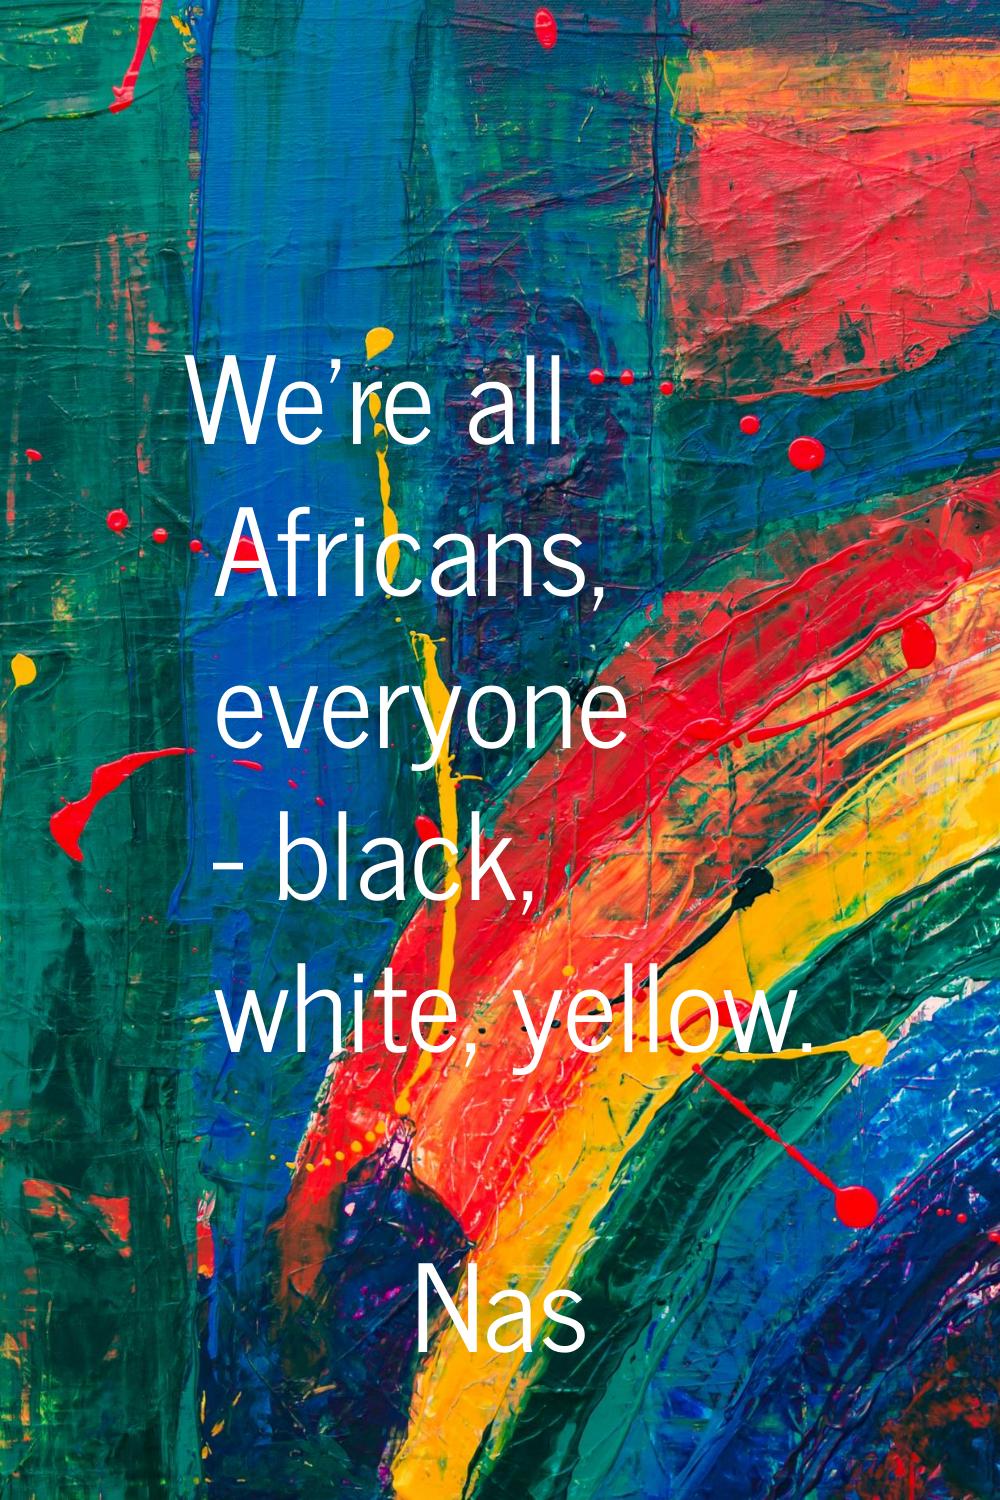 We're all Africans, everyone - black, white, yellow.